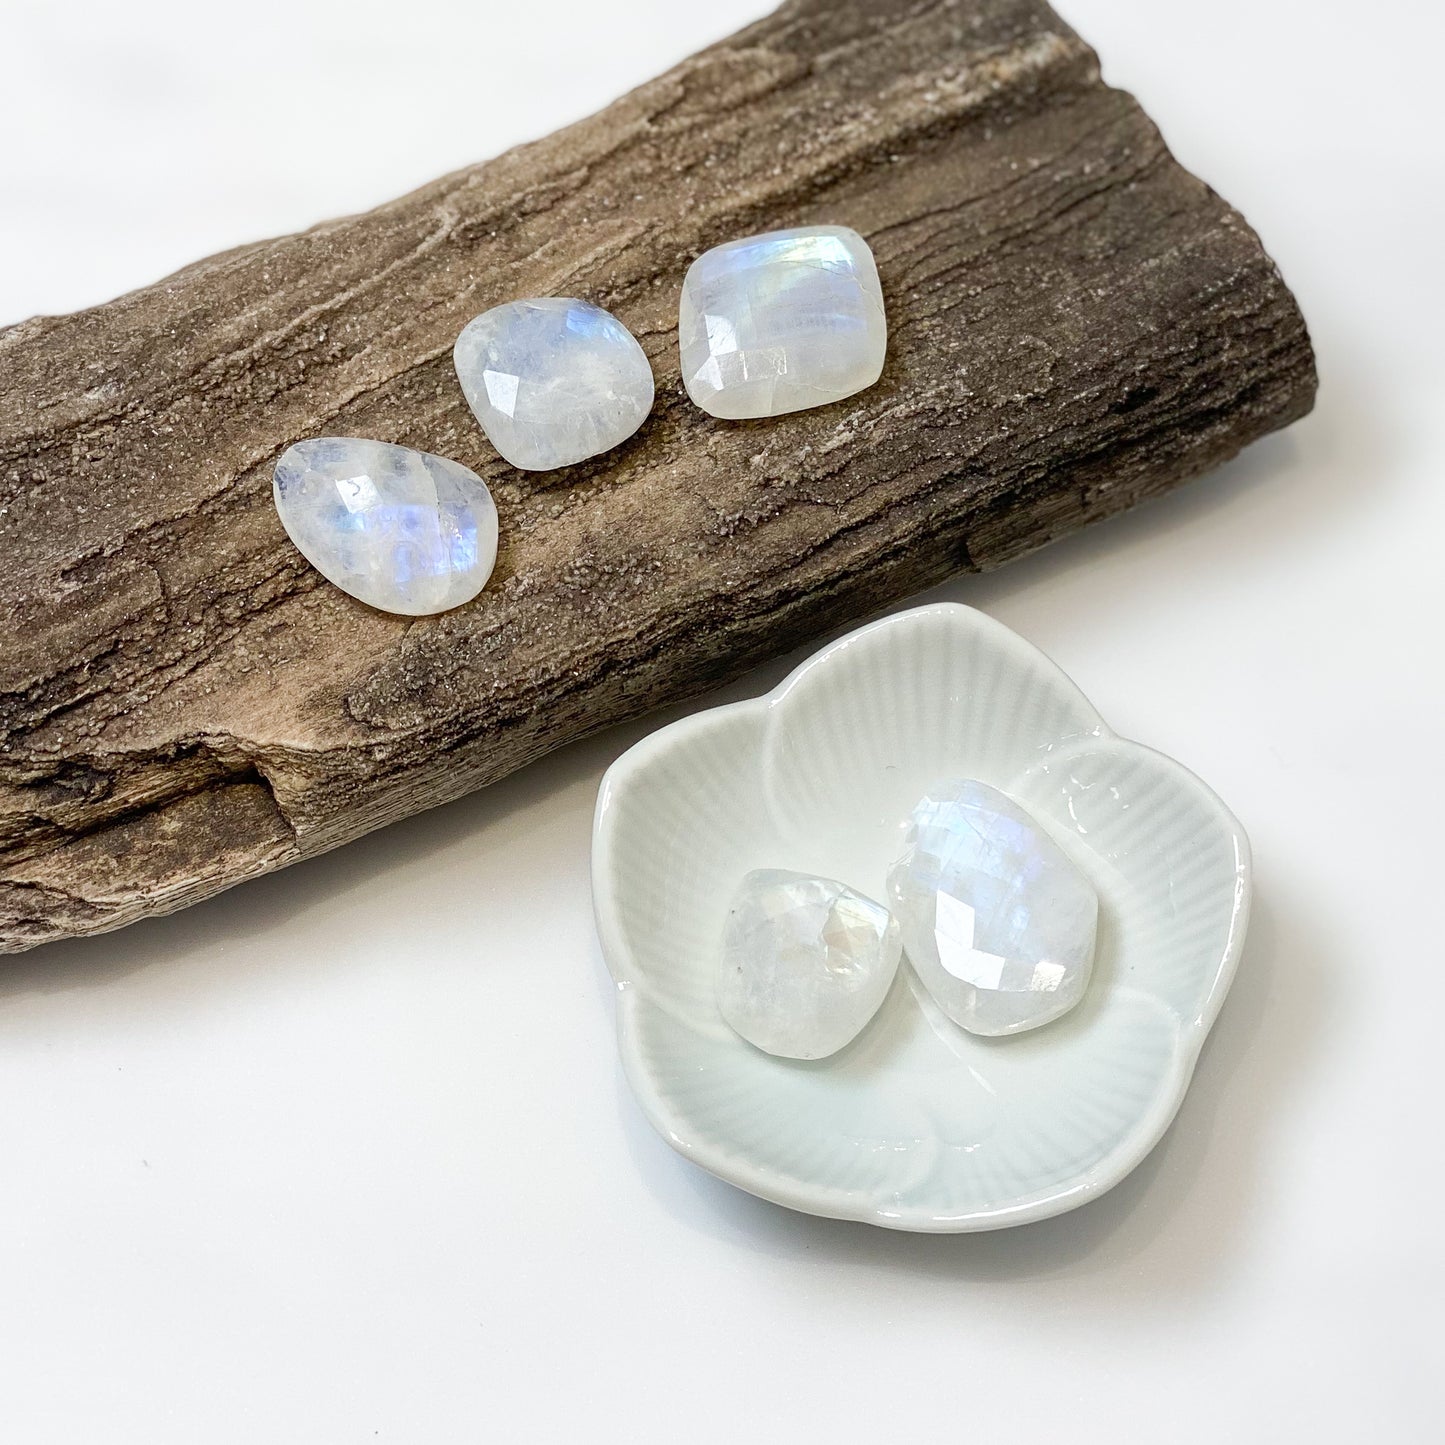 Rainbow Moonstone Faceted Free Form Focal Bead - 1 pc.